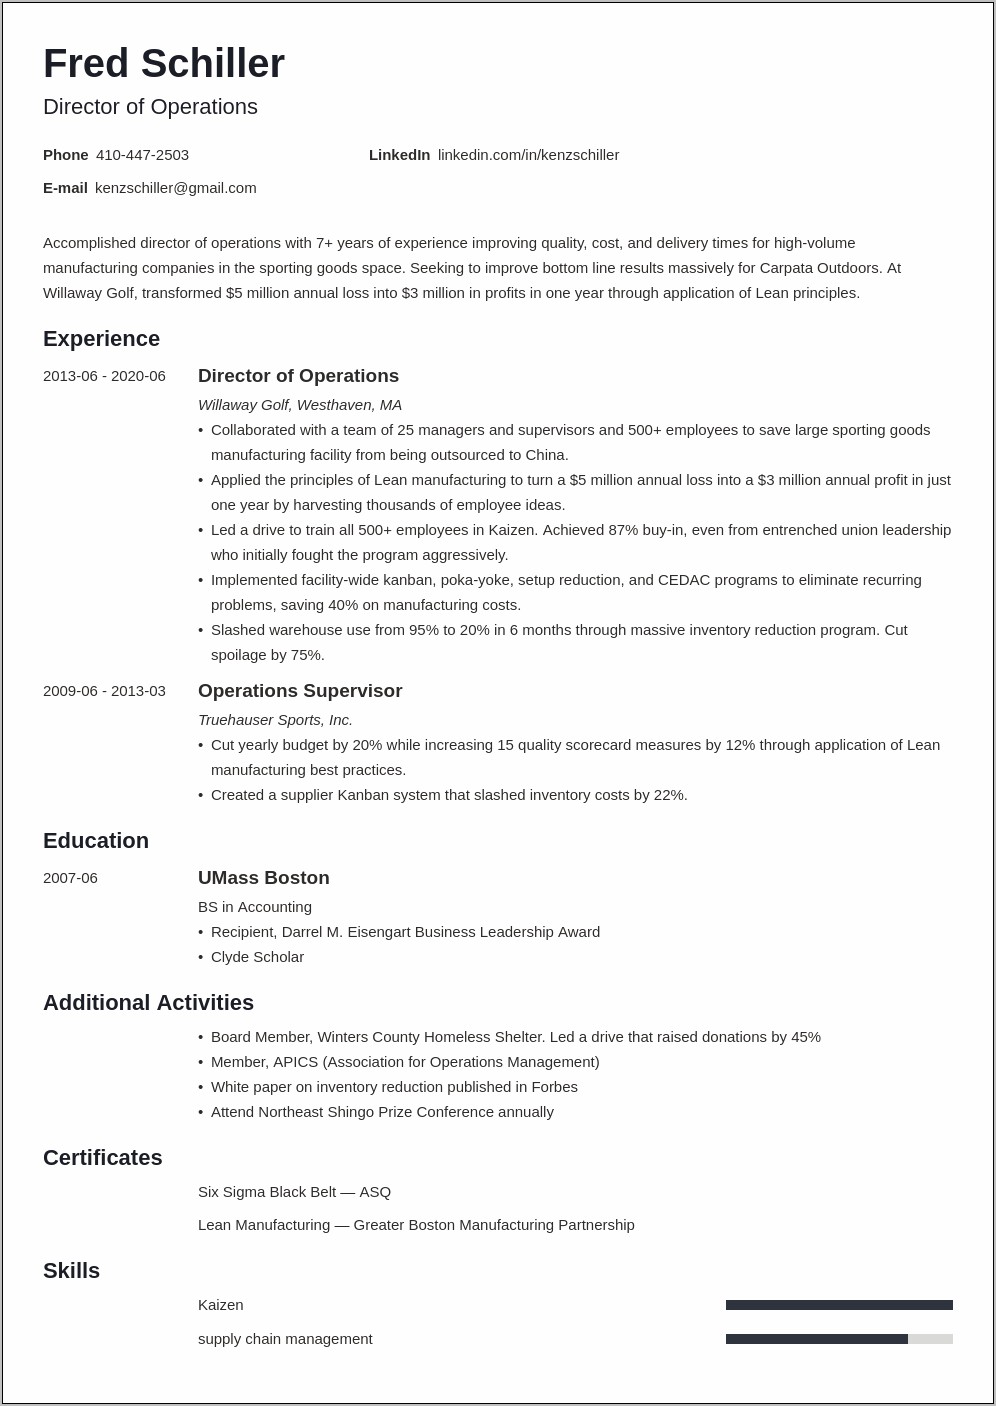 Resume Objective For Operations Supervisor